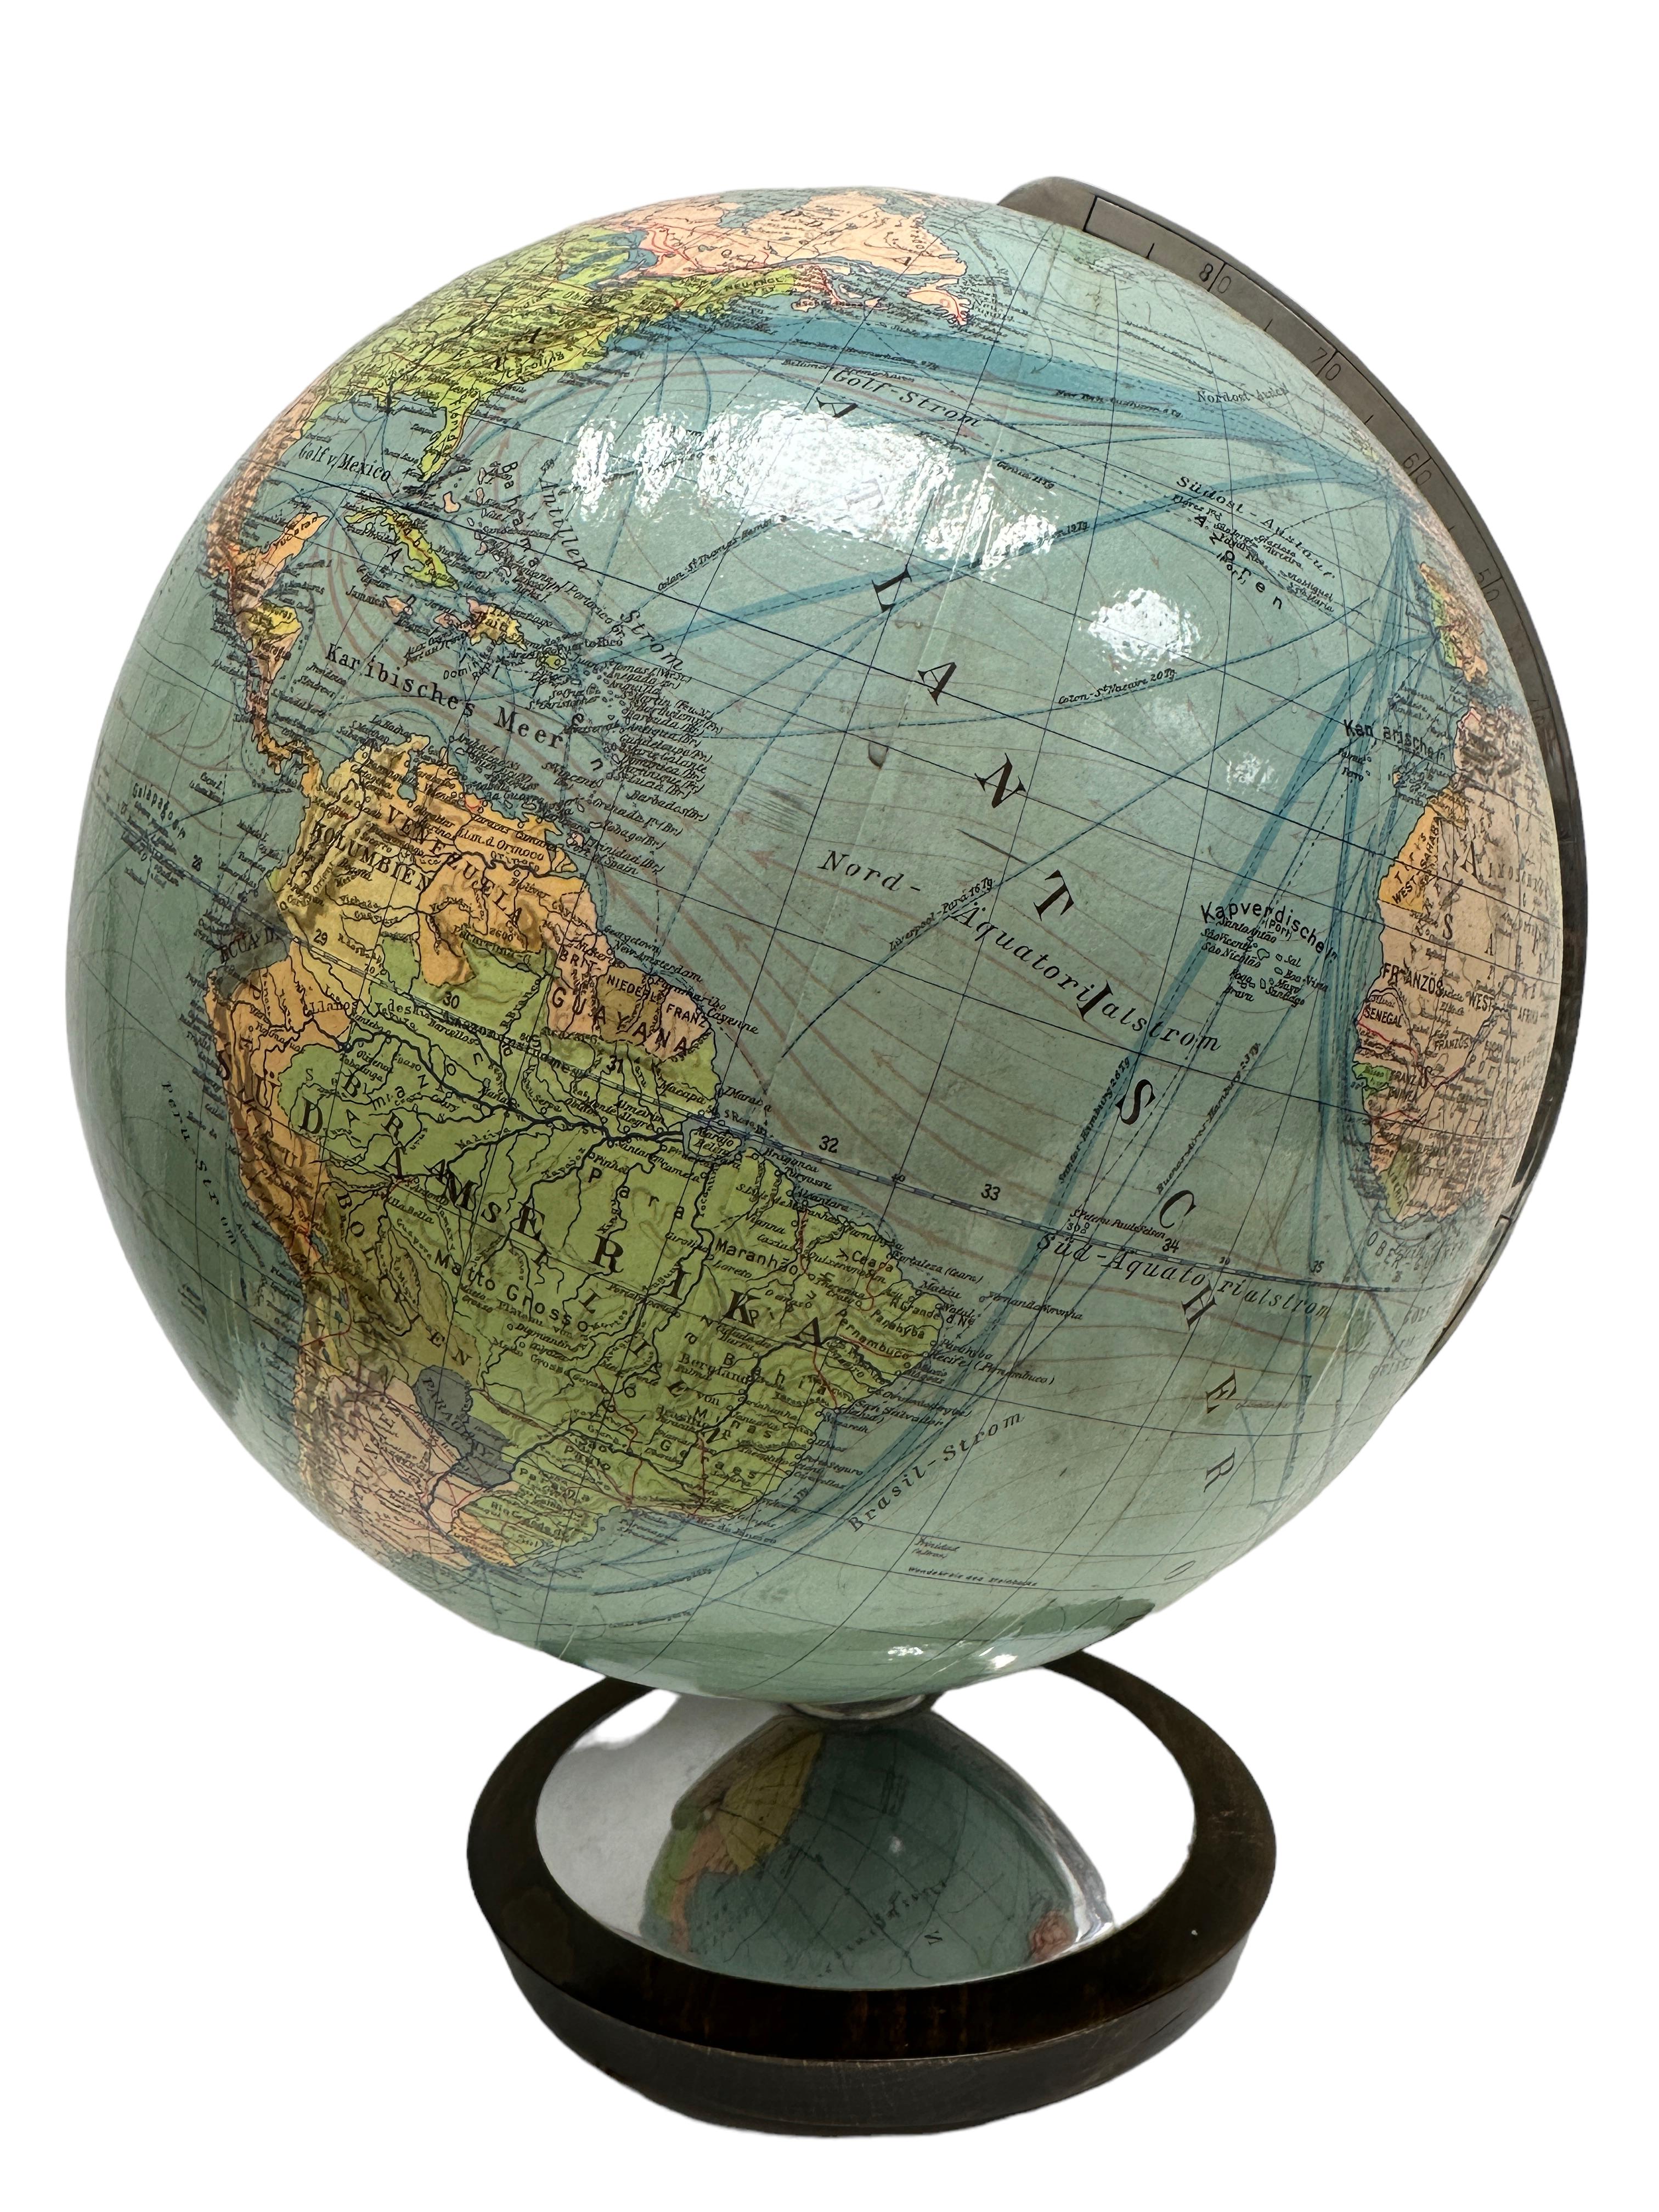 Vintage nice 20th century globe. Made by German manufacturer Oestergaard, Berlin, Germany. It's made of lithographed paper globe with a solid wood and metal base, aluminum knob. Nice addition to any man cave, living room or science room.